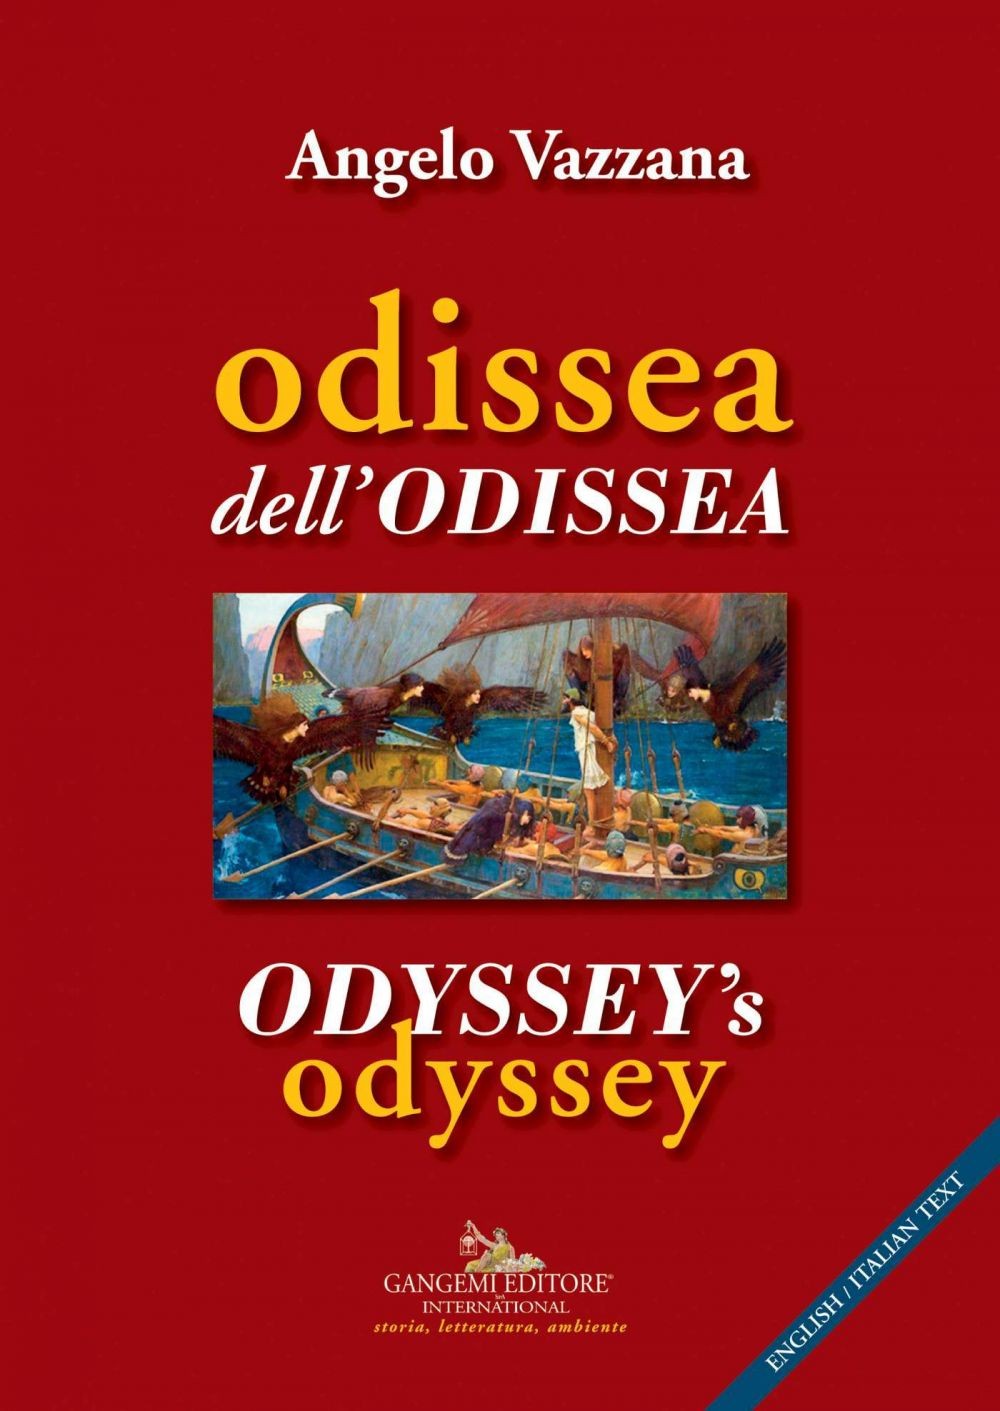 Odissea dell'Odissea - Odyssey's odyssey - Librerie.coop